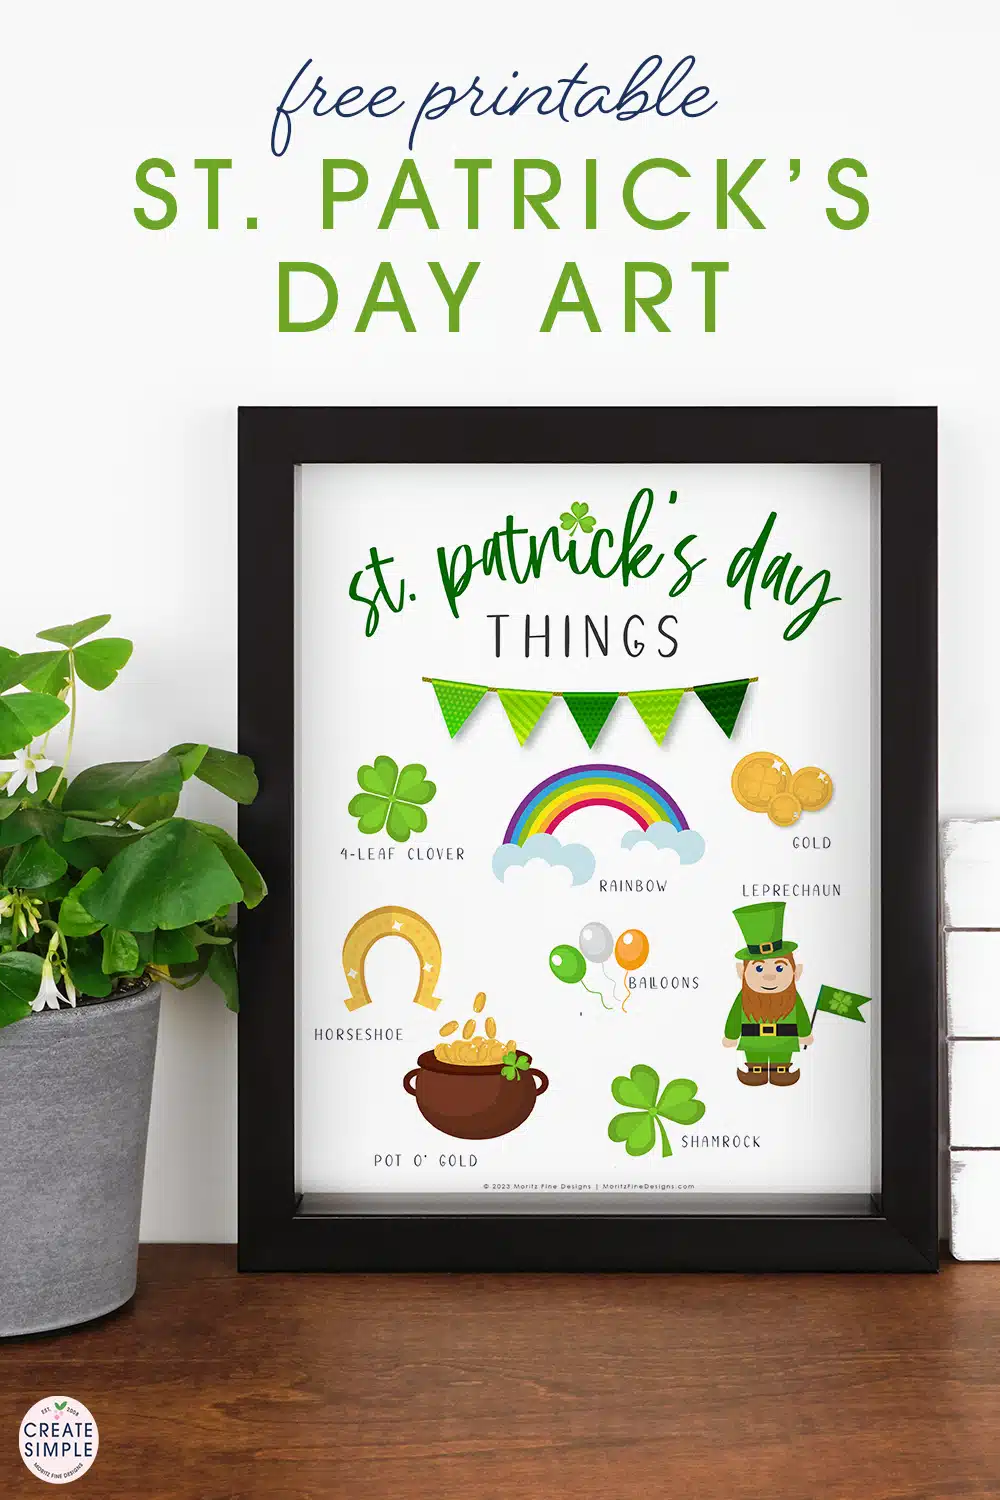 Add St. Patrick's Day decorations to your home in just minutes with this free downloadable printable art. Simply download, print and hang!